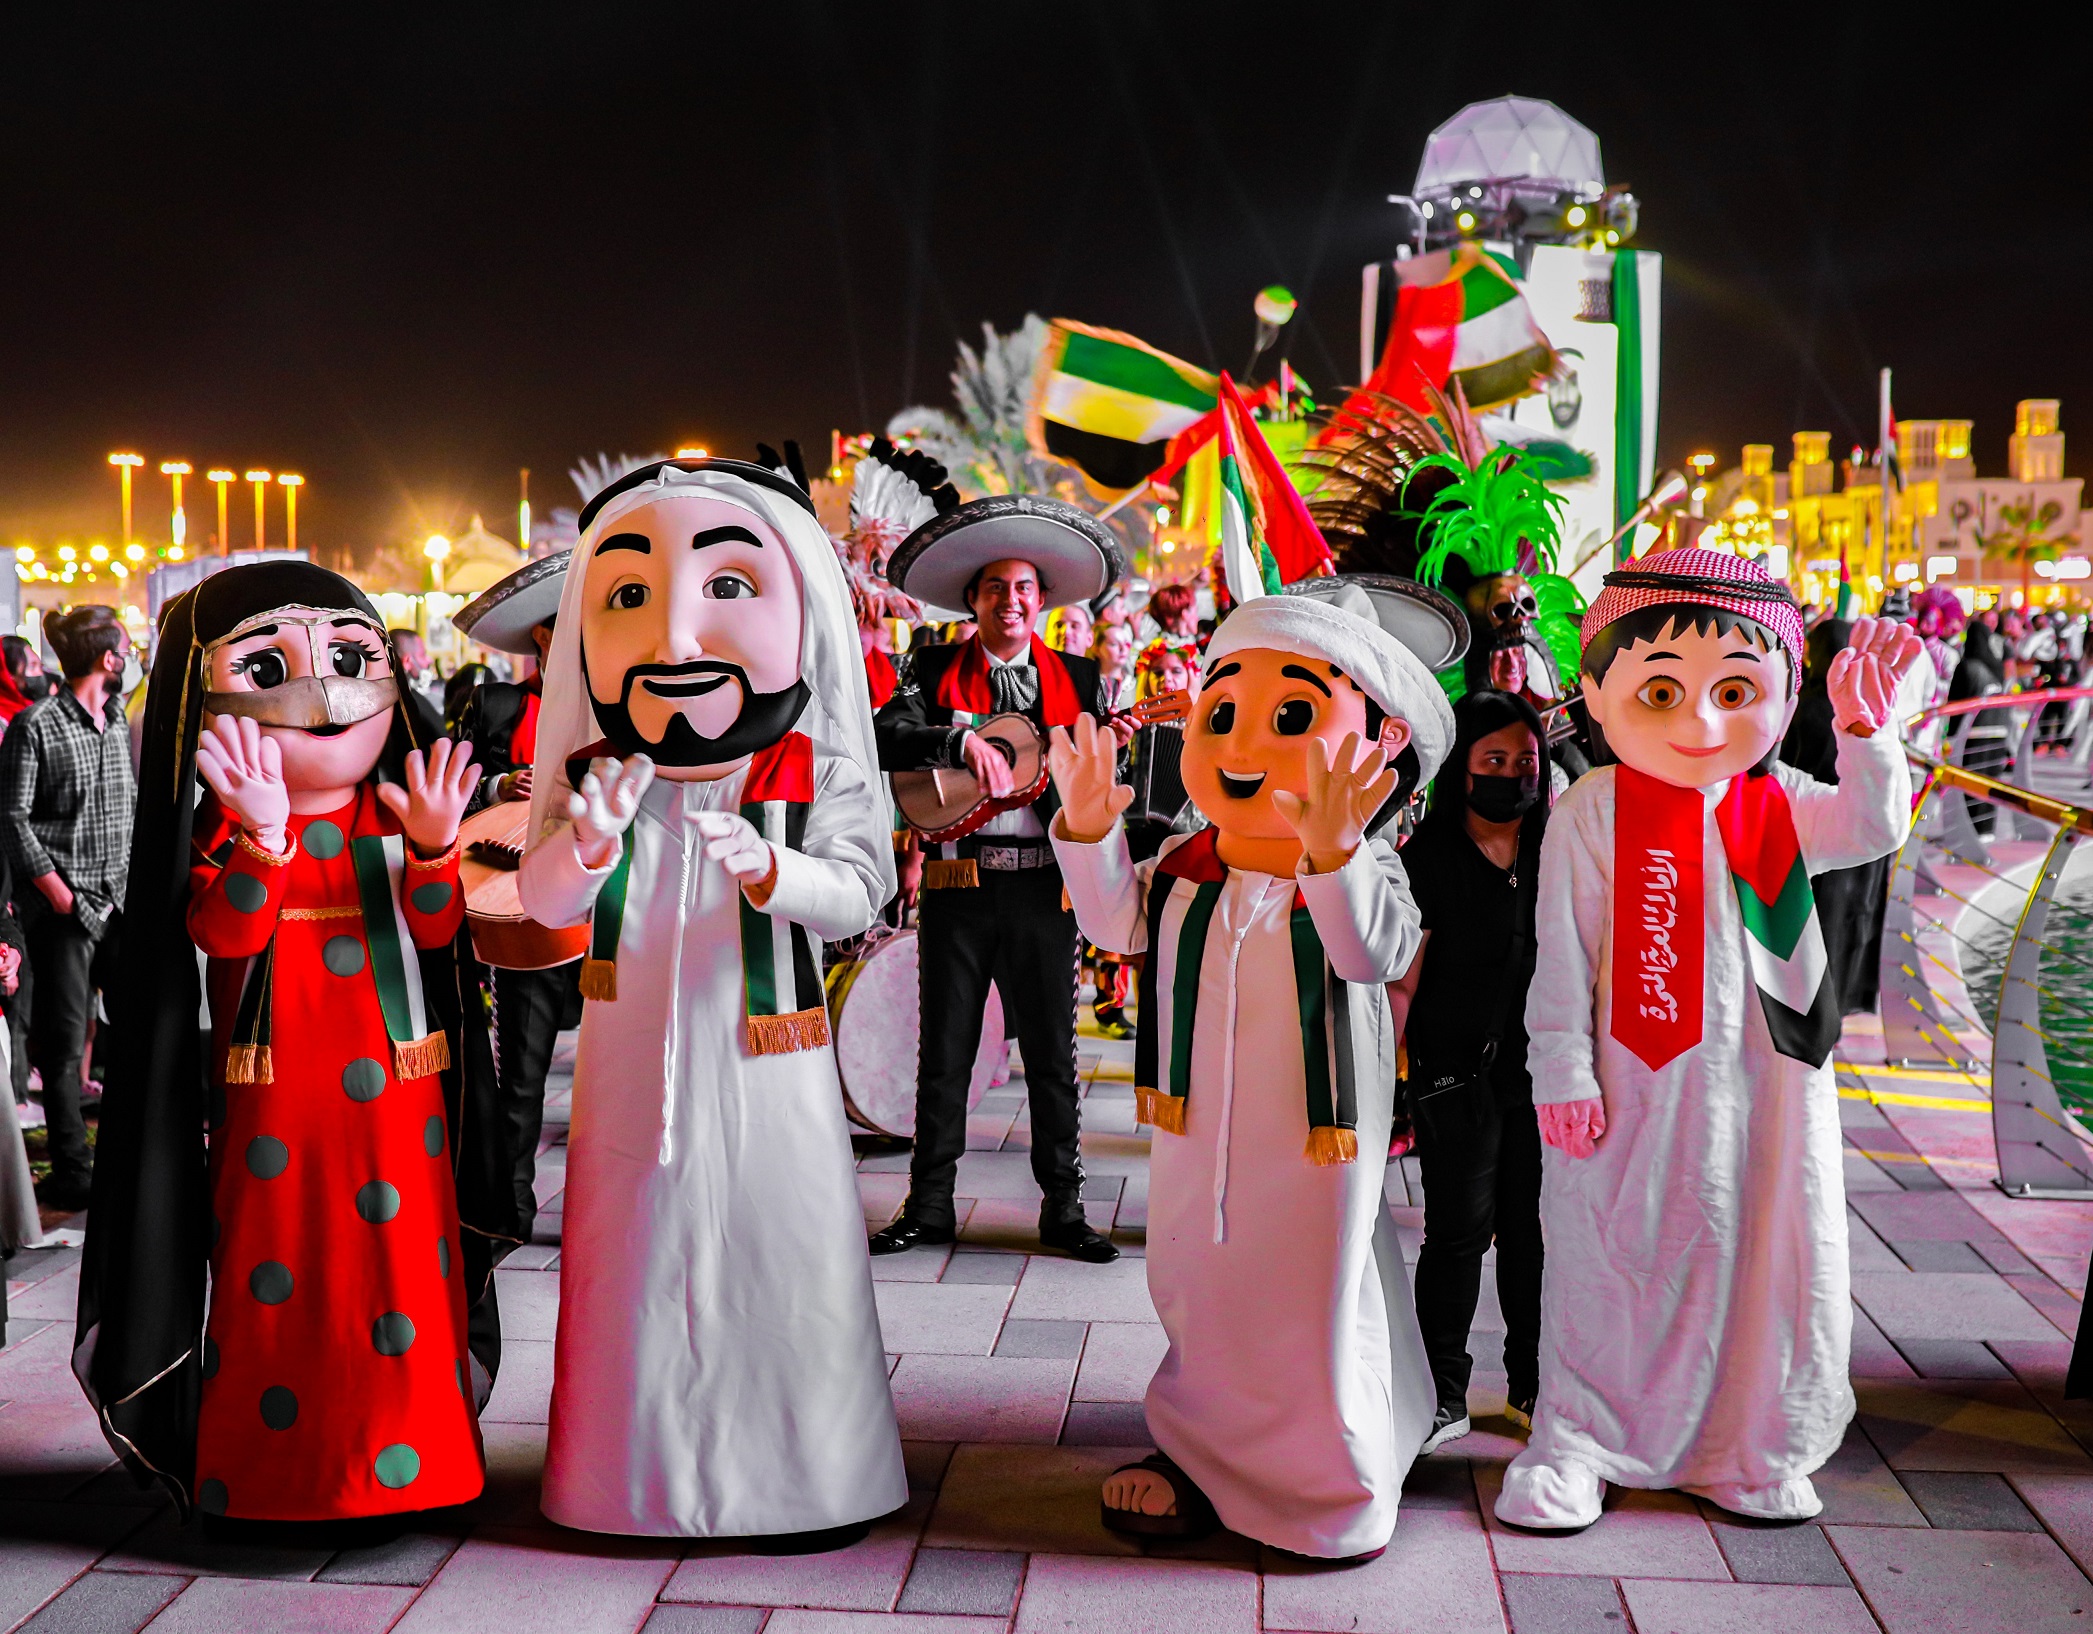 Sheikh Zayed Festival Showcases “A Story Of A Nation” Drone Show